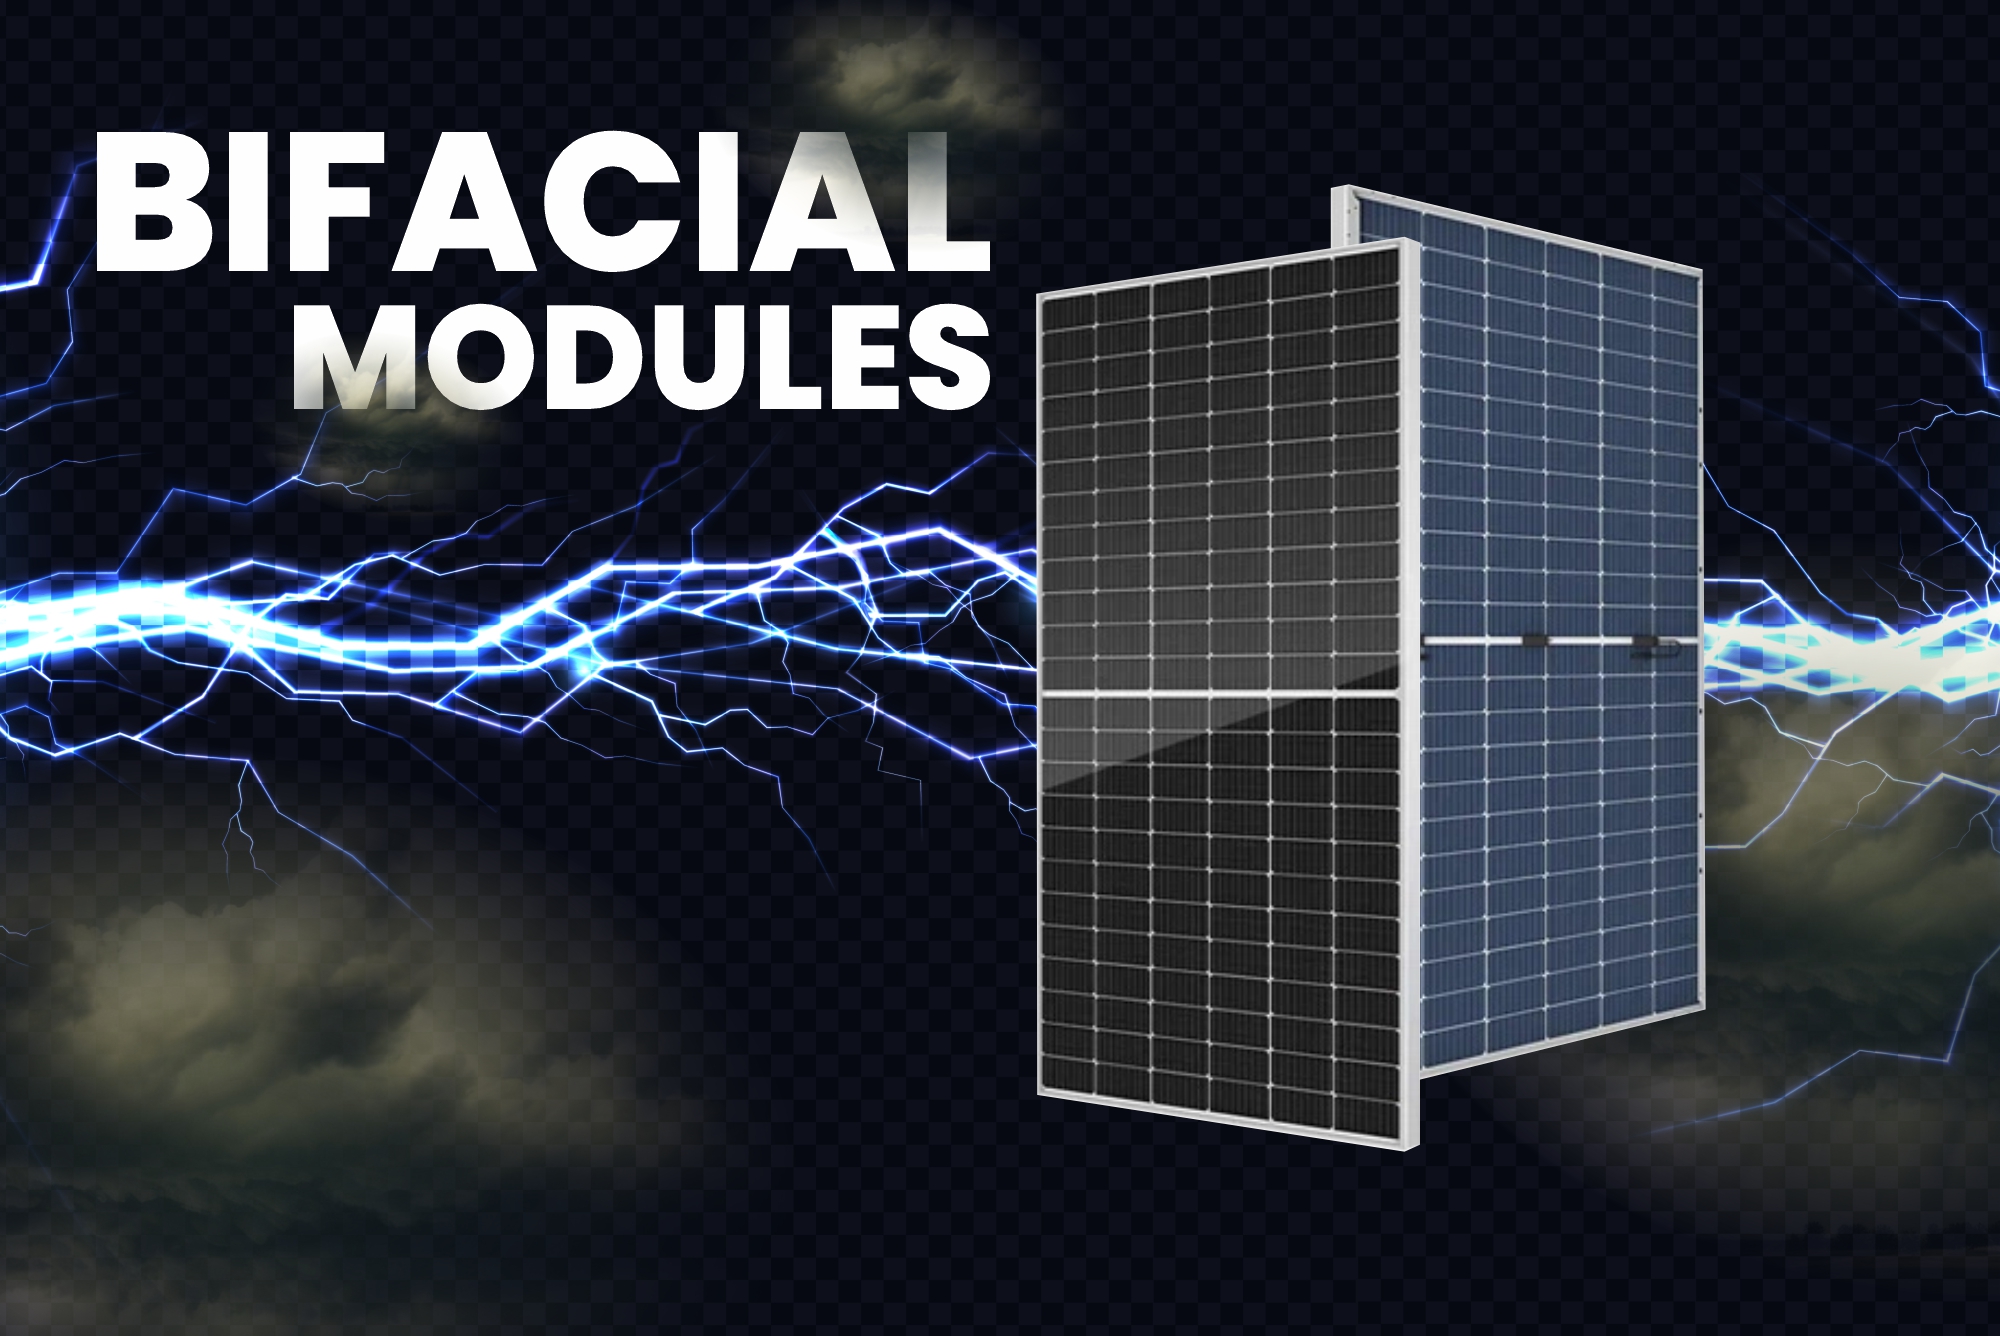 Double Your Solar Power Generation with APS India’s Bifacial Solar Panels!